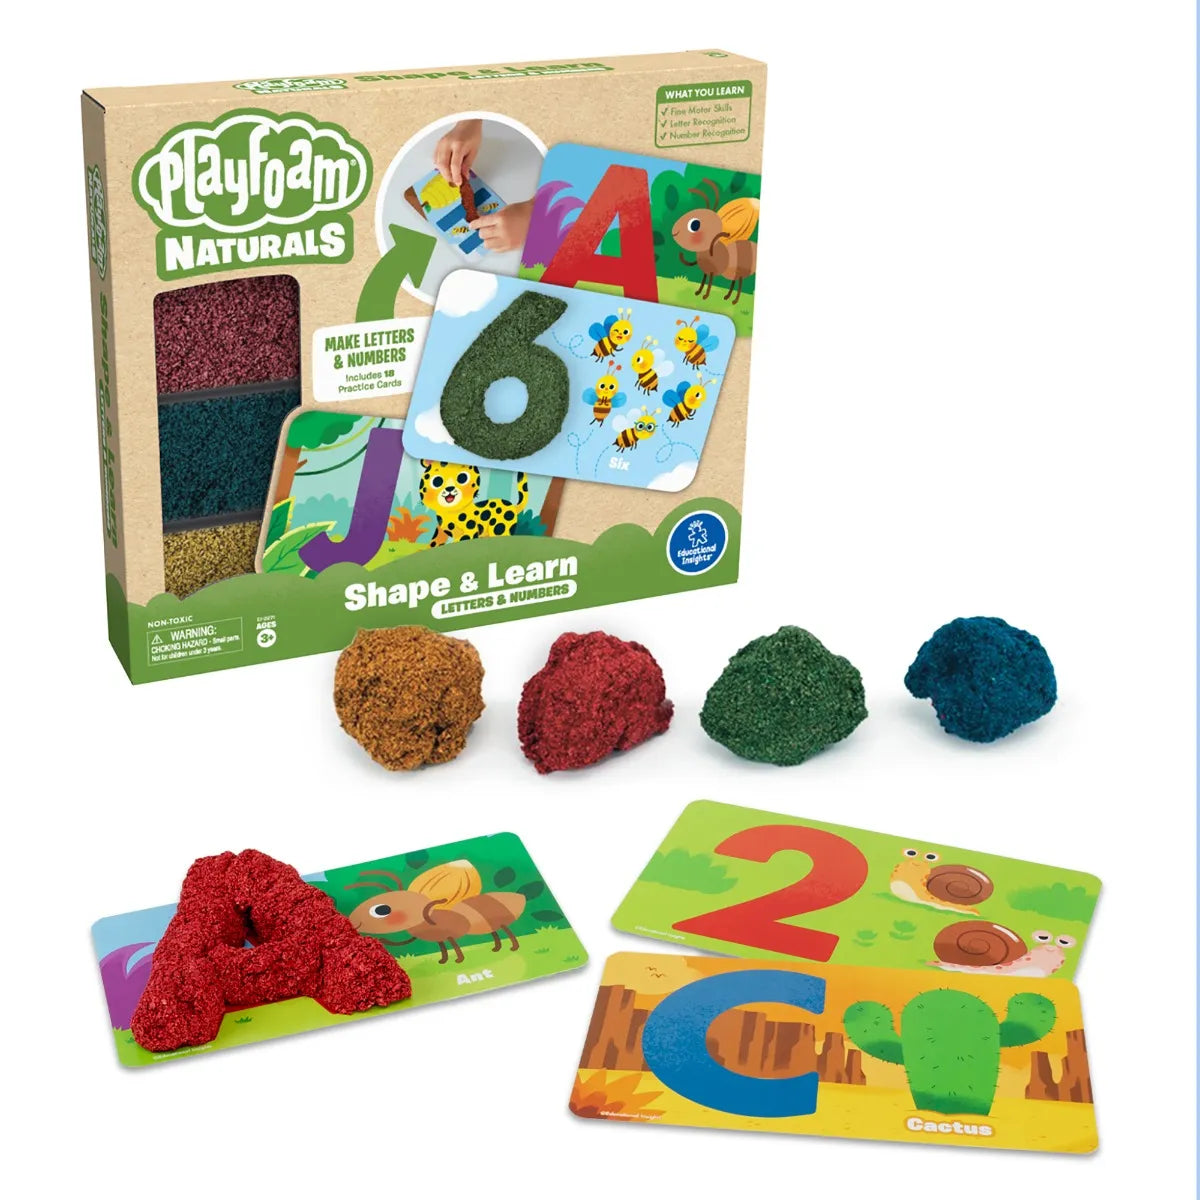 Playfoam® Naturals Shape & Learn Letters & Number